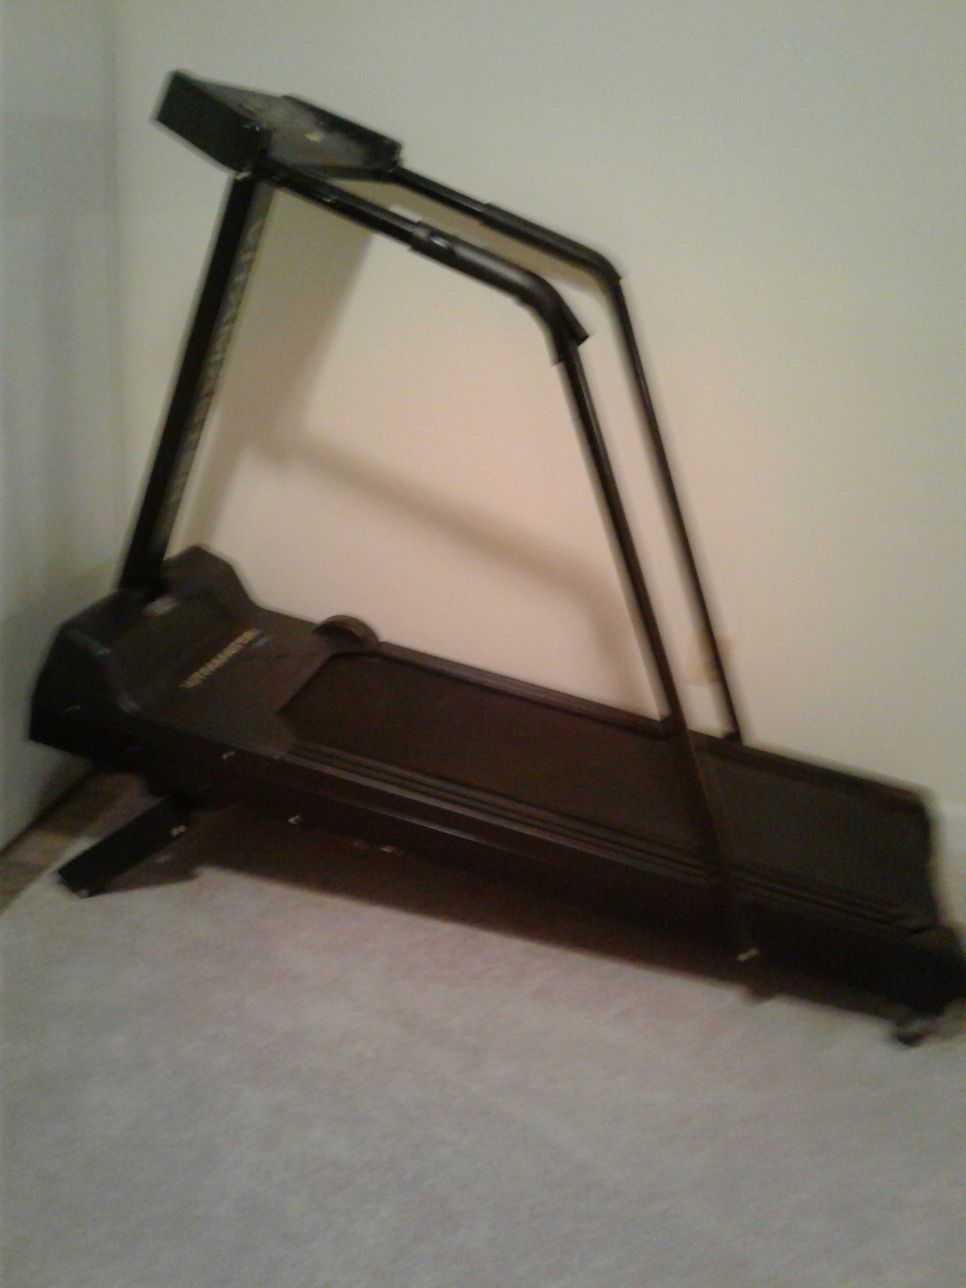 Treadmill with complete information system almost new working great